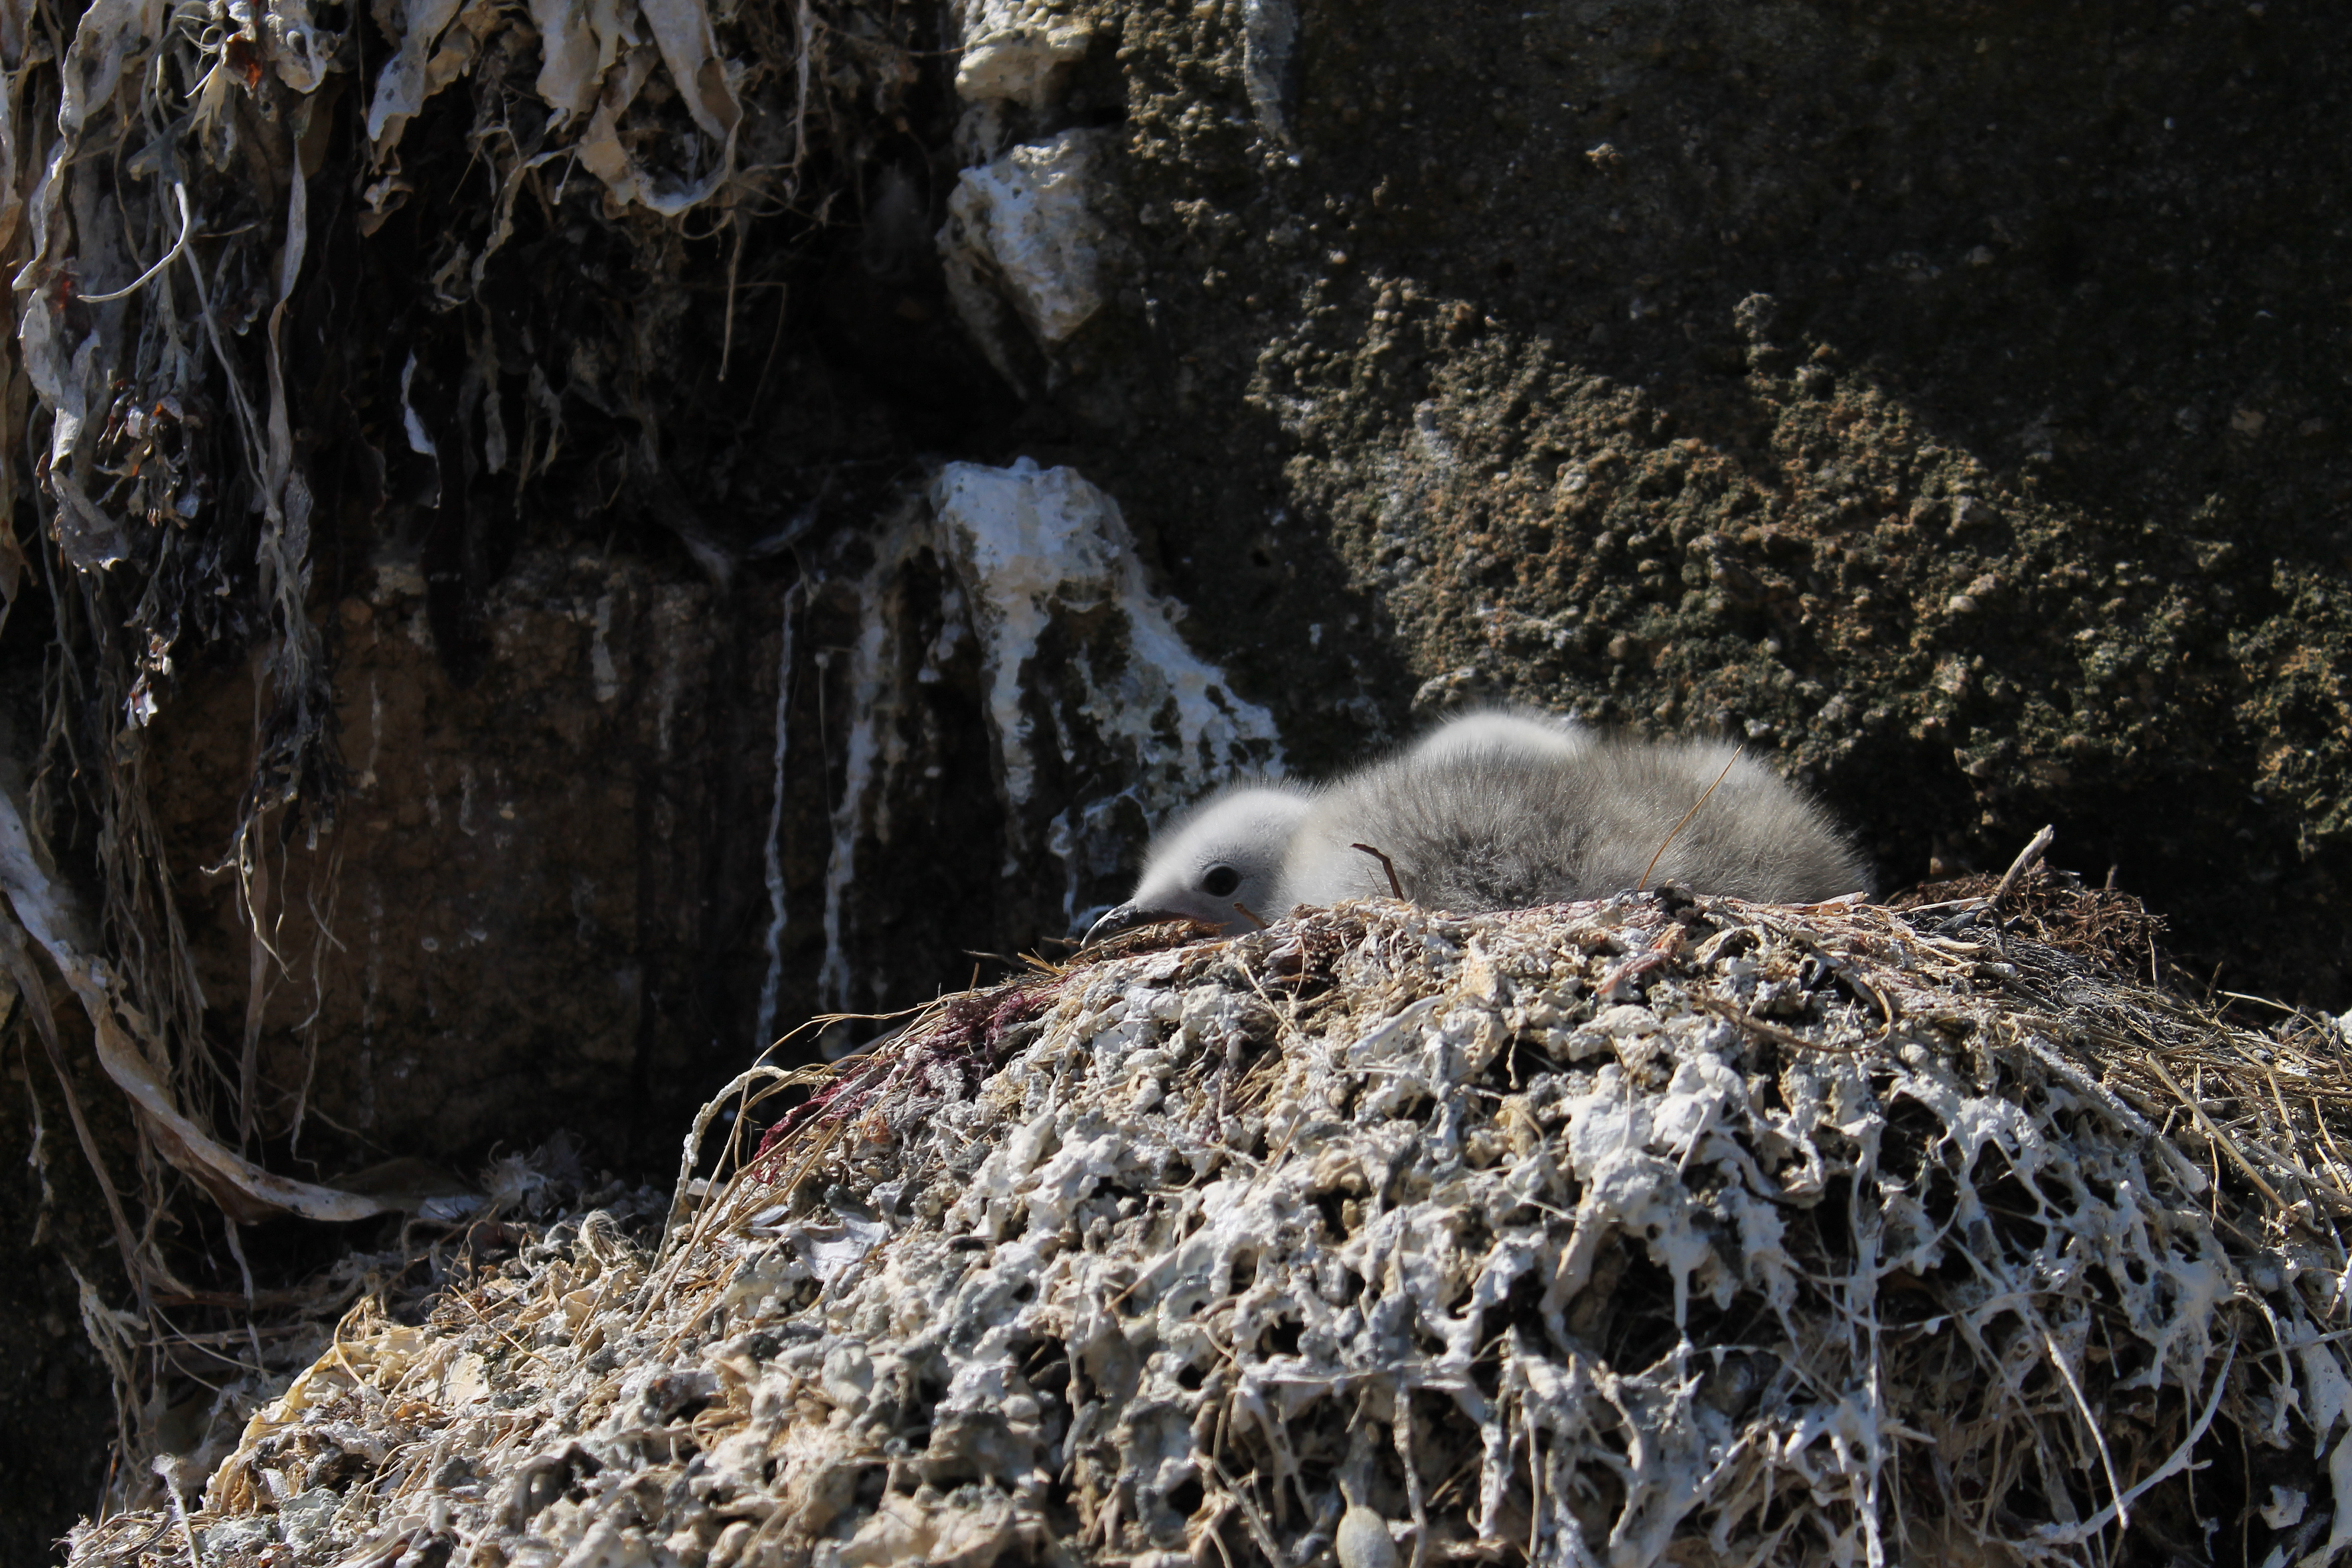 Kittiwake chick on Gugh, Isles of Scilly